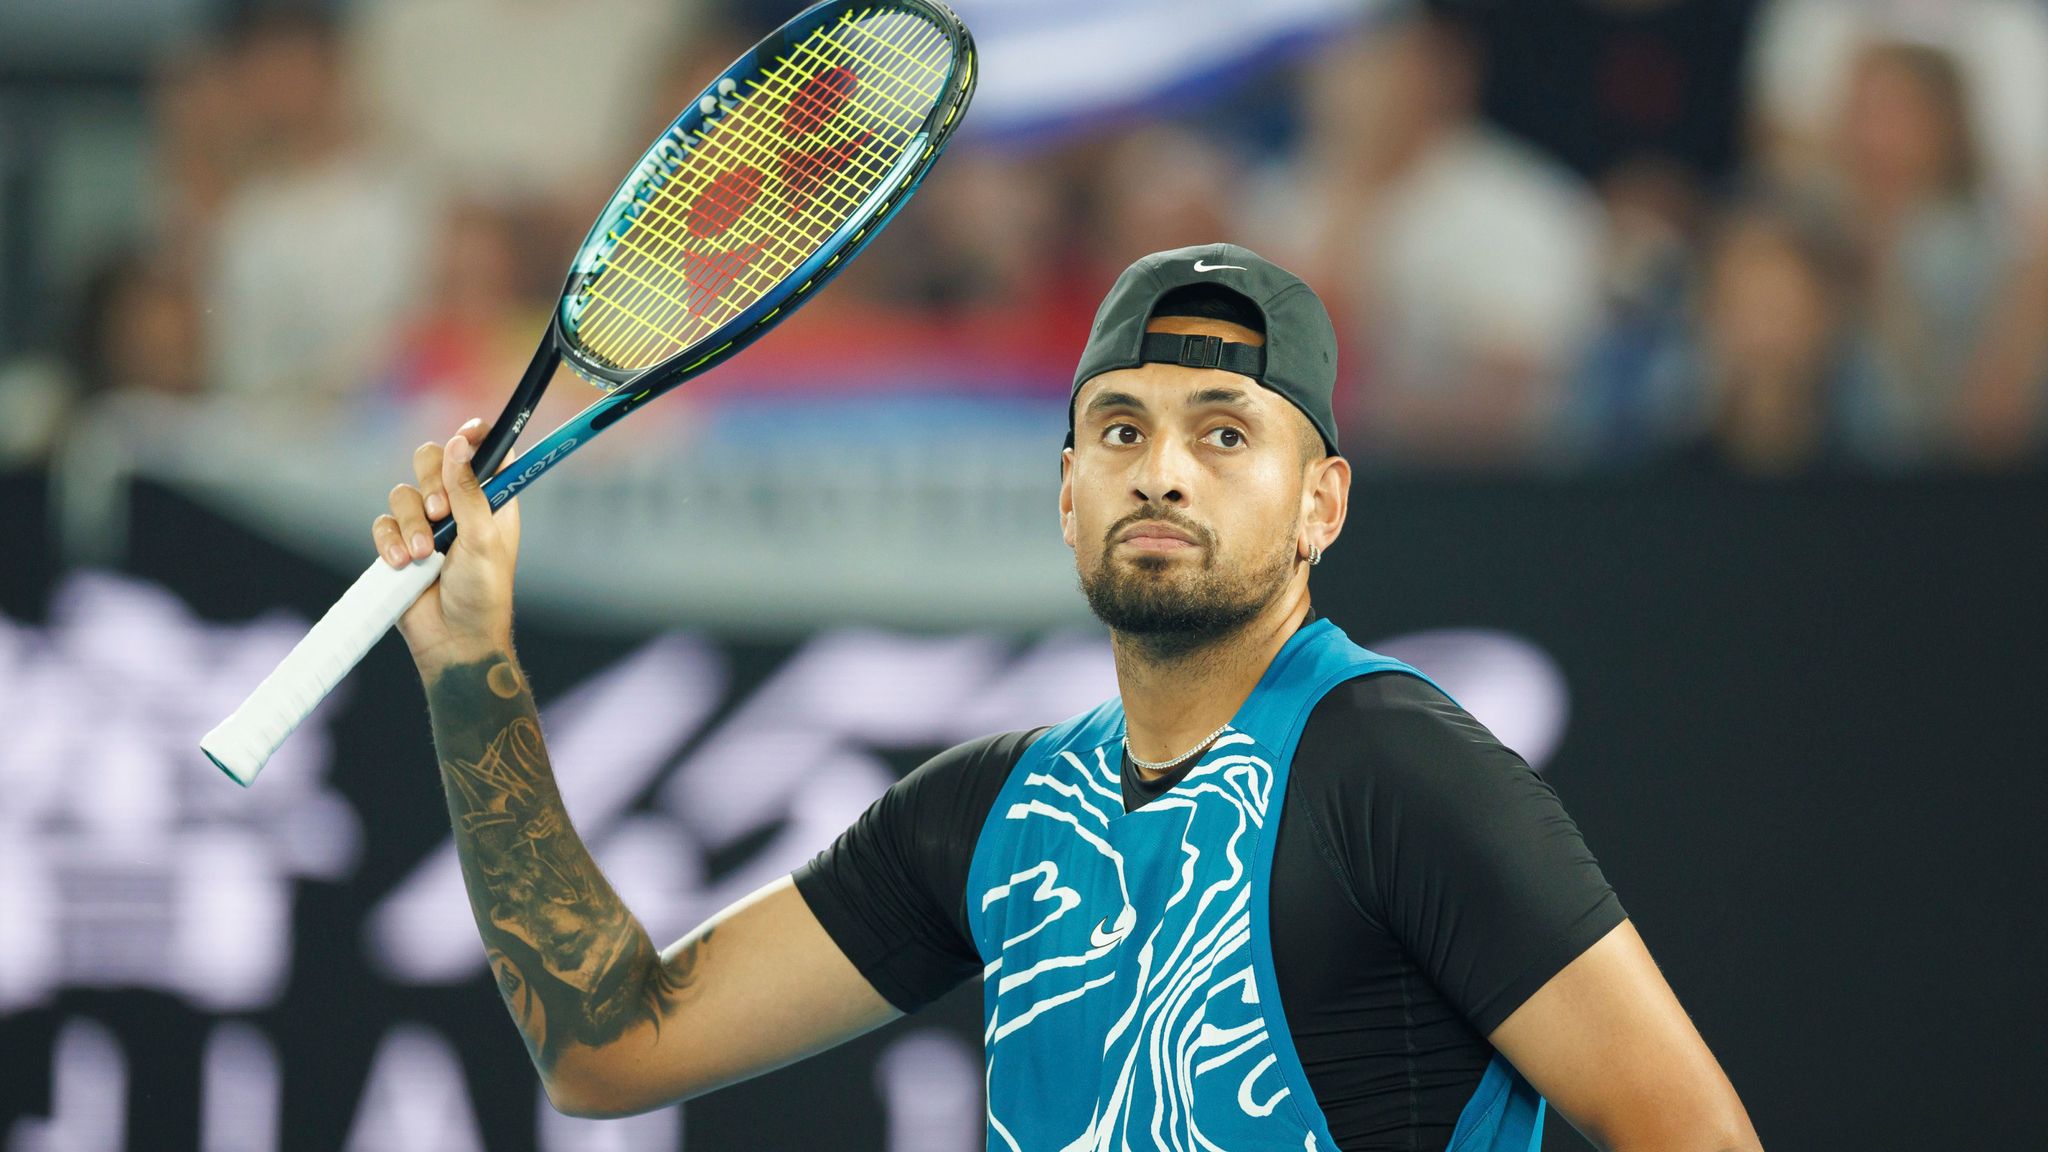 Nick Kyrgios reveals extent of his drinking after struggles with tennis prodigy tag Tennis News Sky Sports